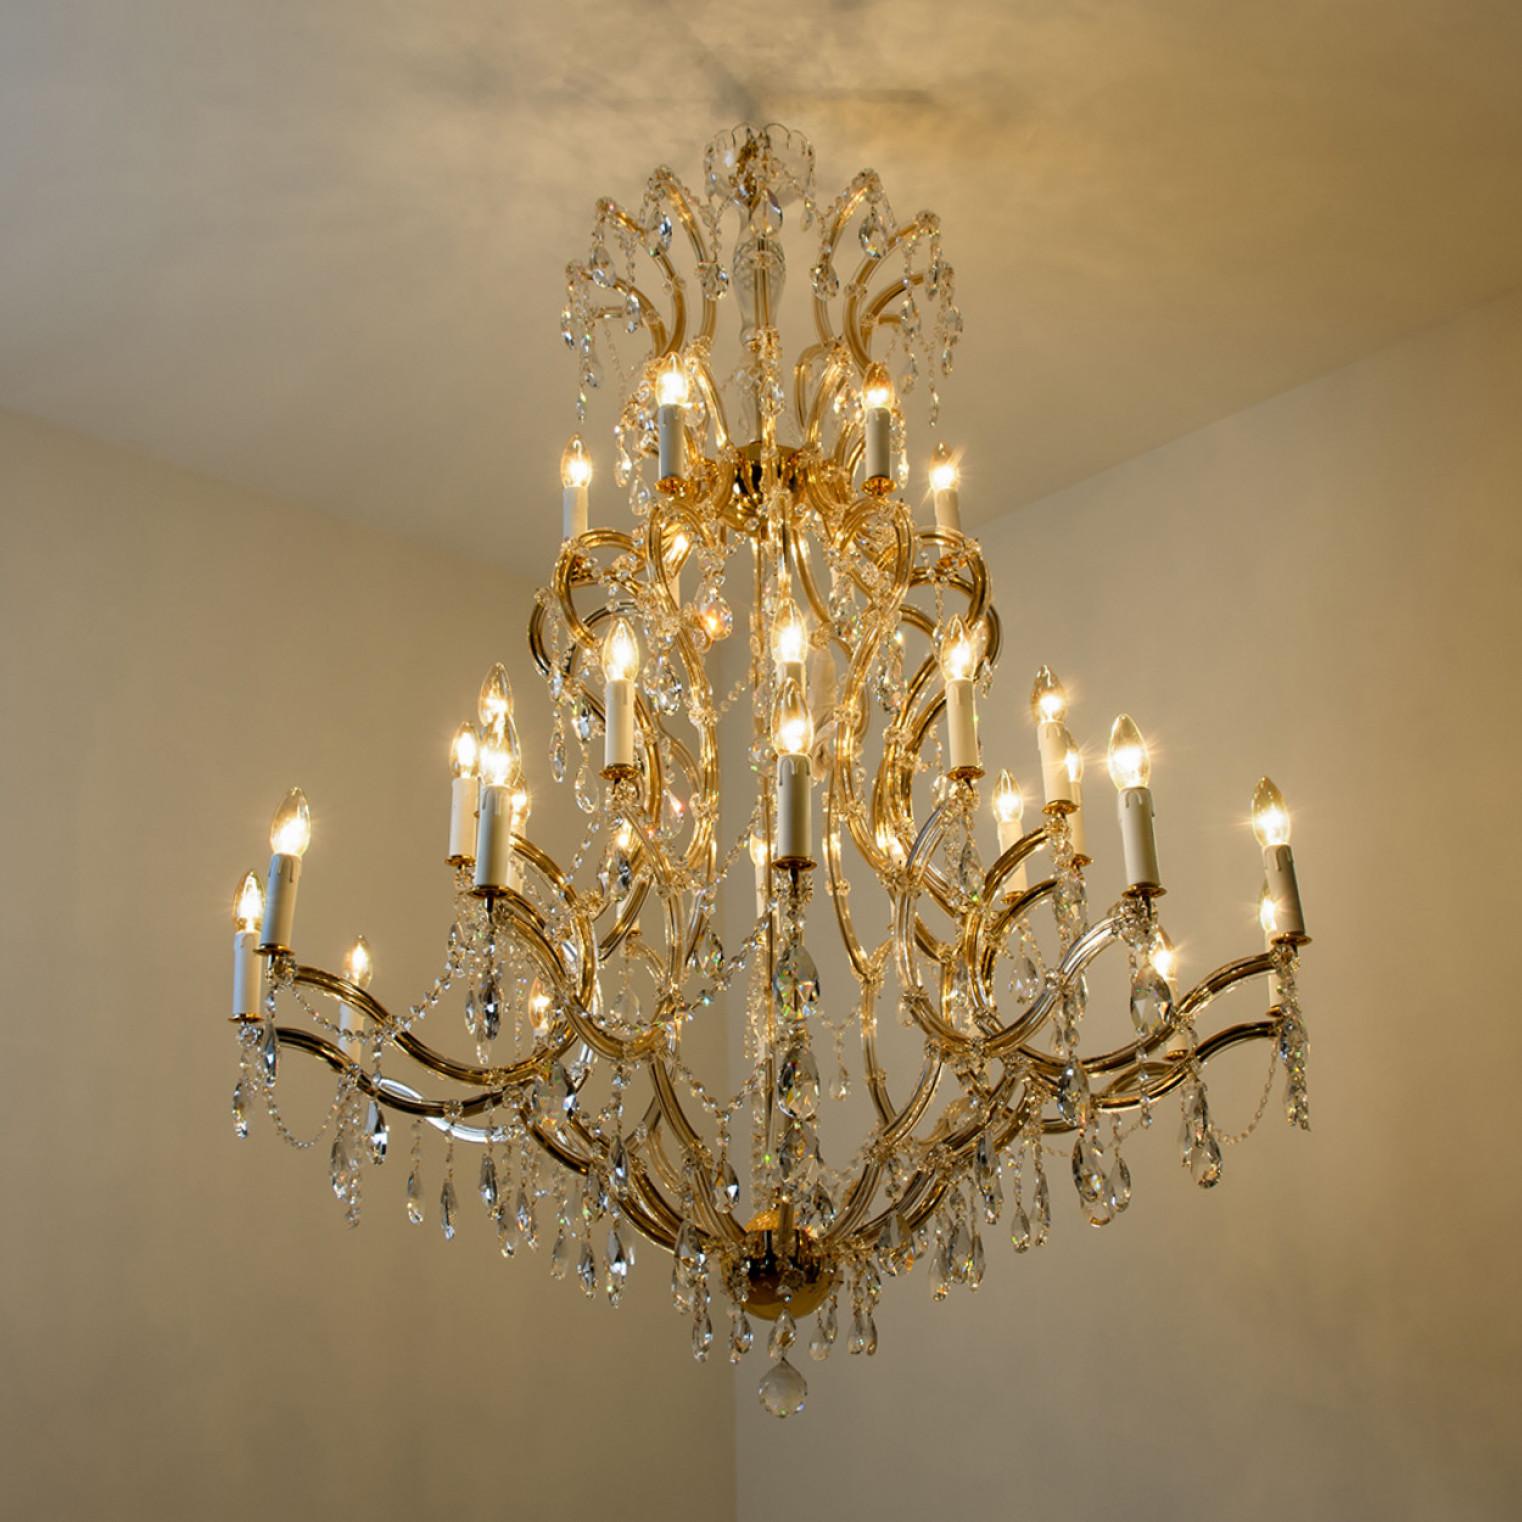 High-End XL Maria Theresa Gold Plated Swarovski Chandelier For Sale 4